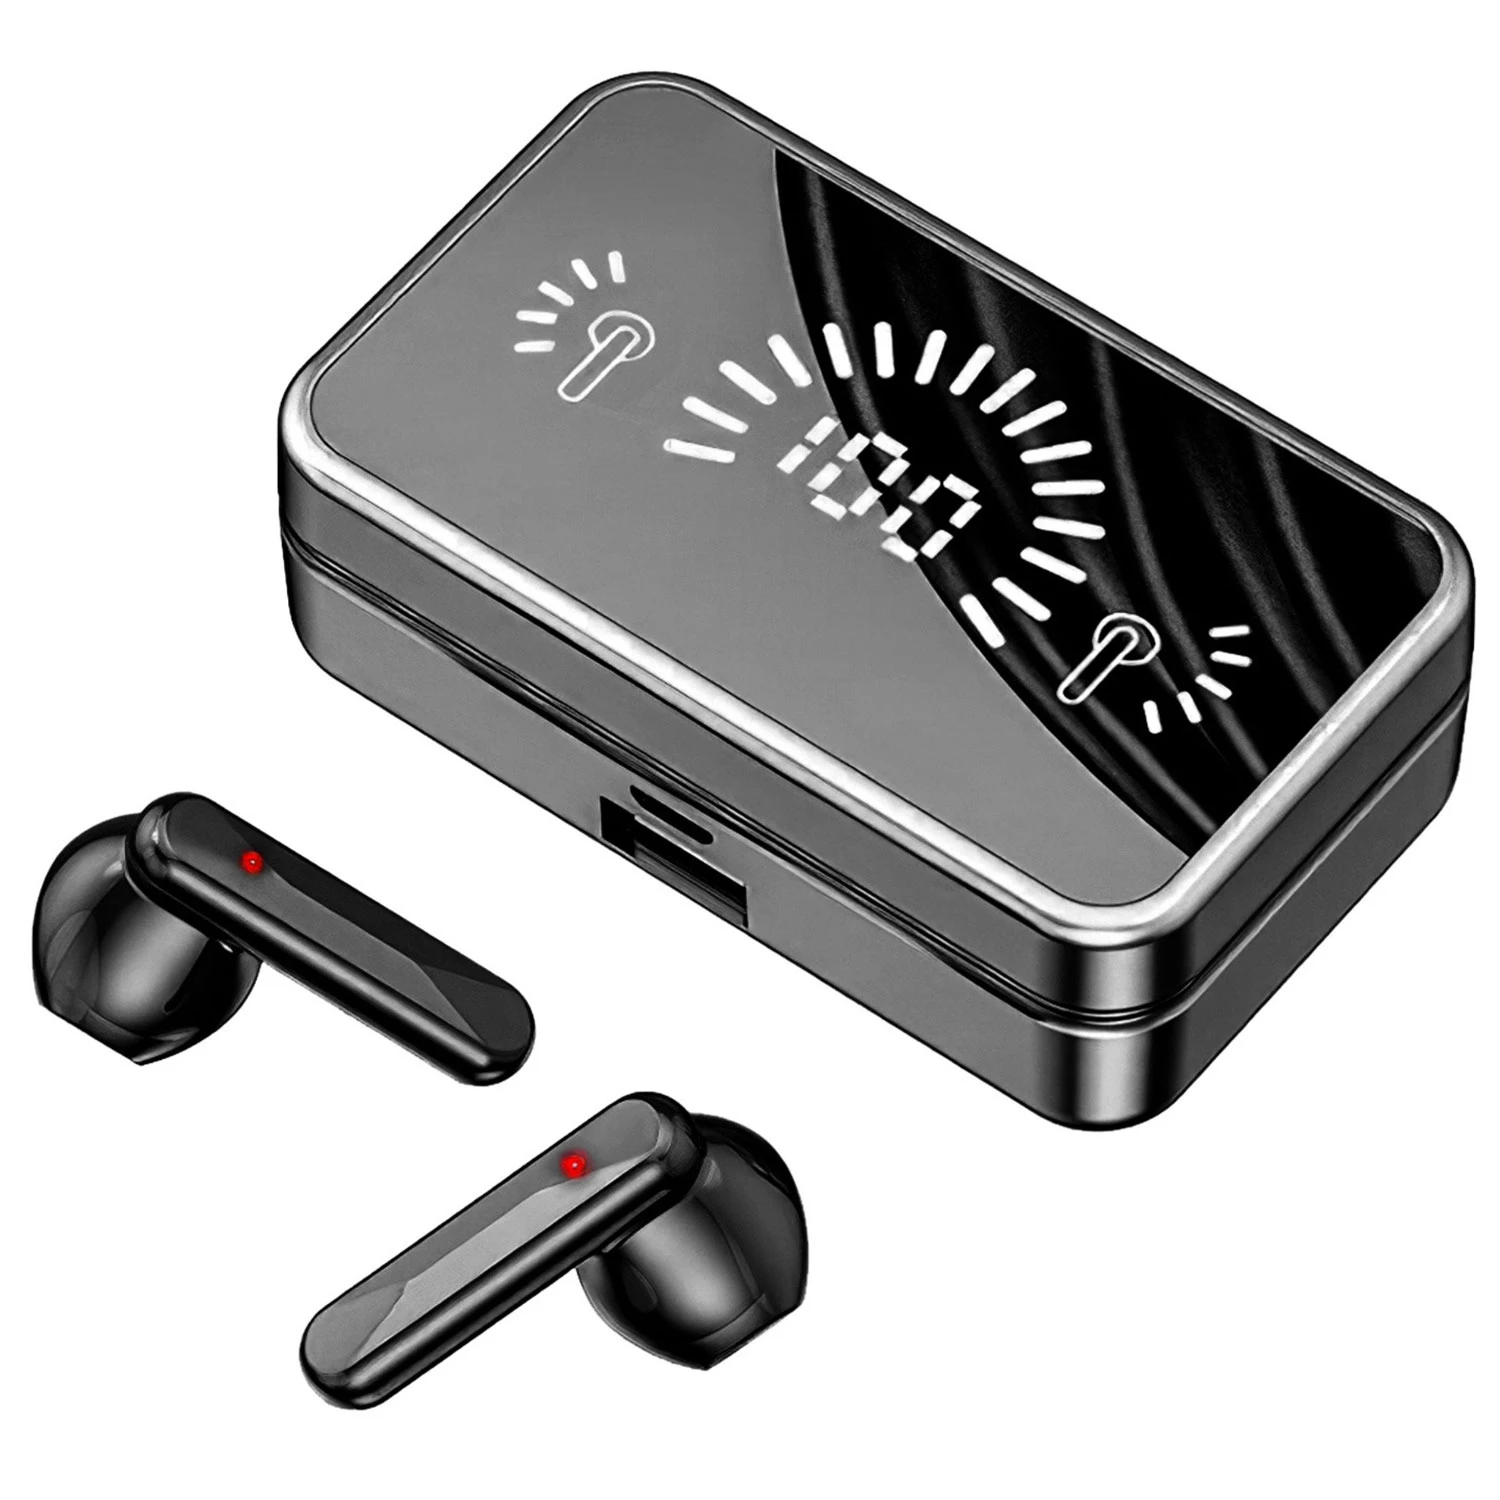 5.3 TWS Wireless Earbuds with Touch Control, In-Ear Headphones, Charging Case, Built-in Mic